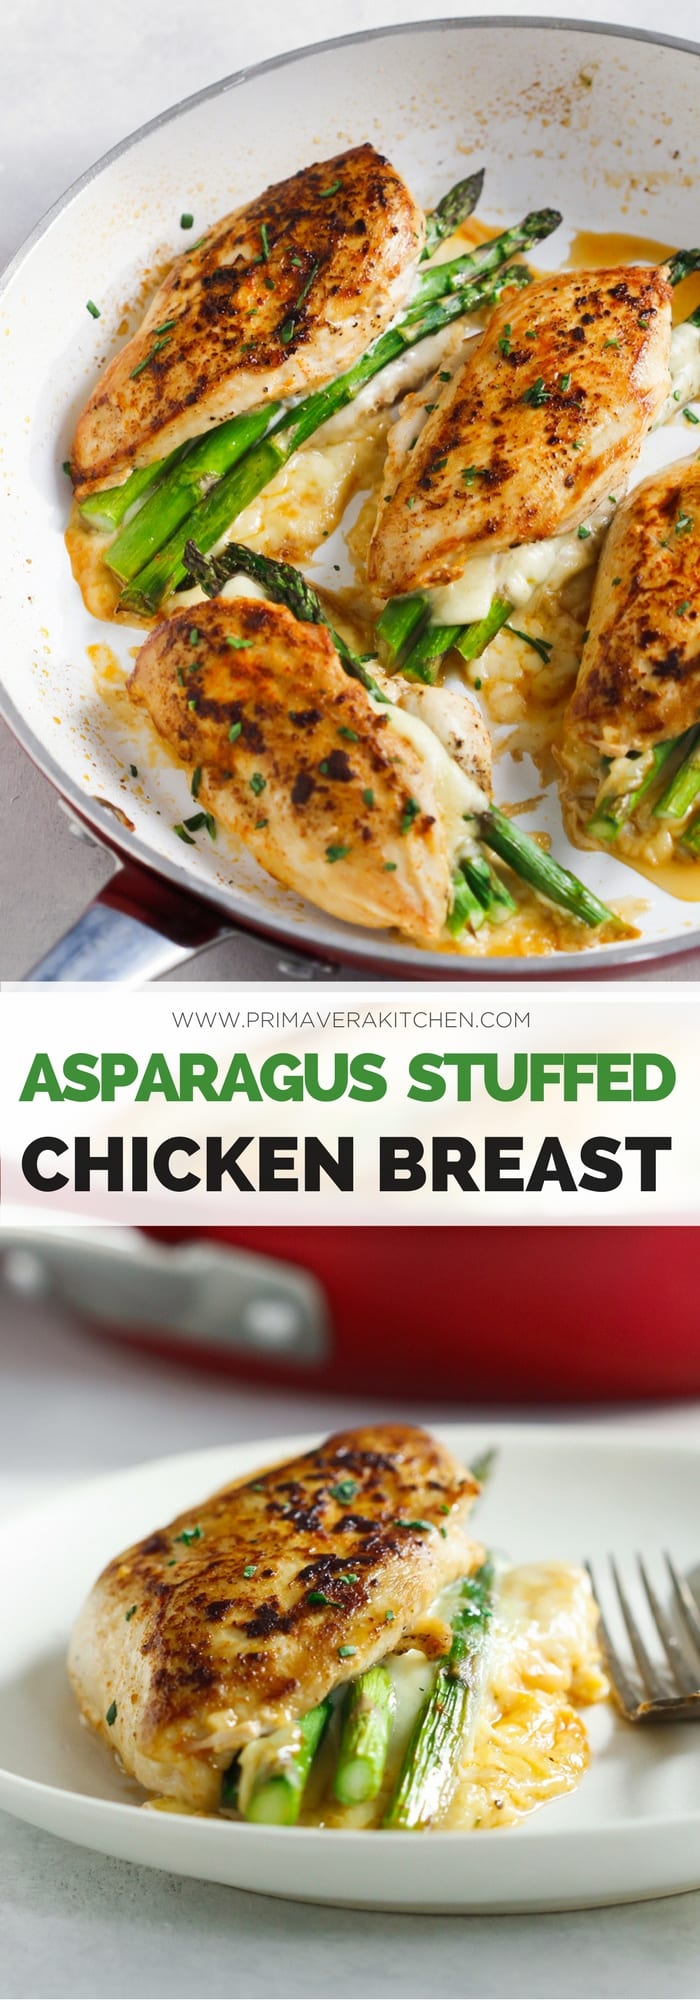 Asparagus Stuffed Chicken Breast - This fast, easy and delicious Asparagus Stuffed Chicken Breast recipe is a perfect meal for your weeknight dinner and it requires only 4-ingredient. | www.primaverakitchen.com